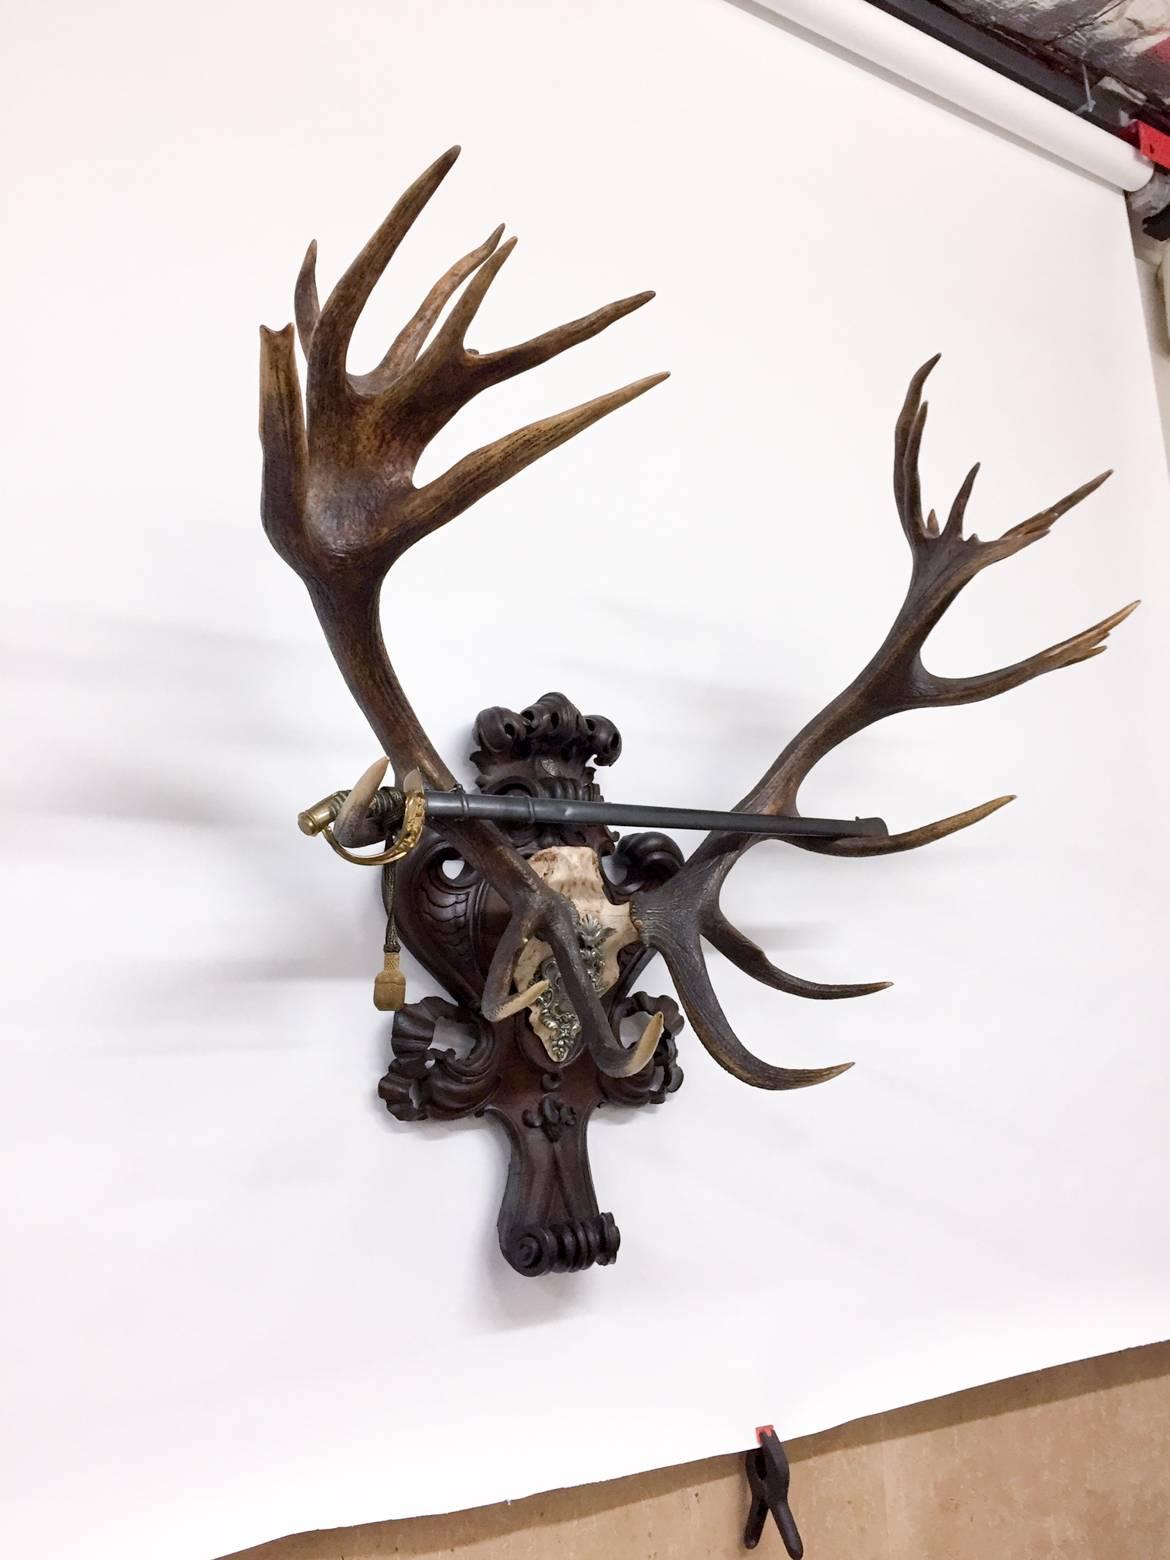 This 19th century Austrian Red Stag trophy is mounted on an original, Black Forest plaque and features an original Royal commemorative plaque from 1899. The sword was the original dress sword of Kaiser Wilhelm II of Germany, and features a sharkskin